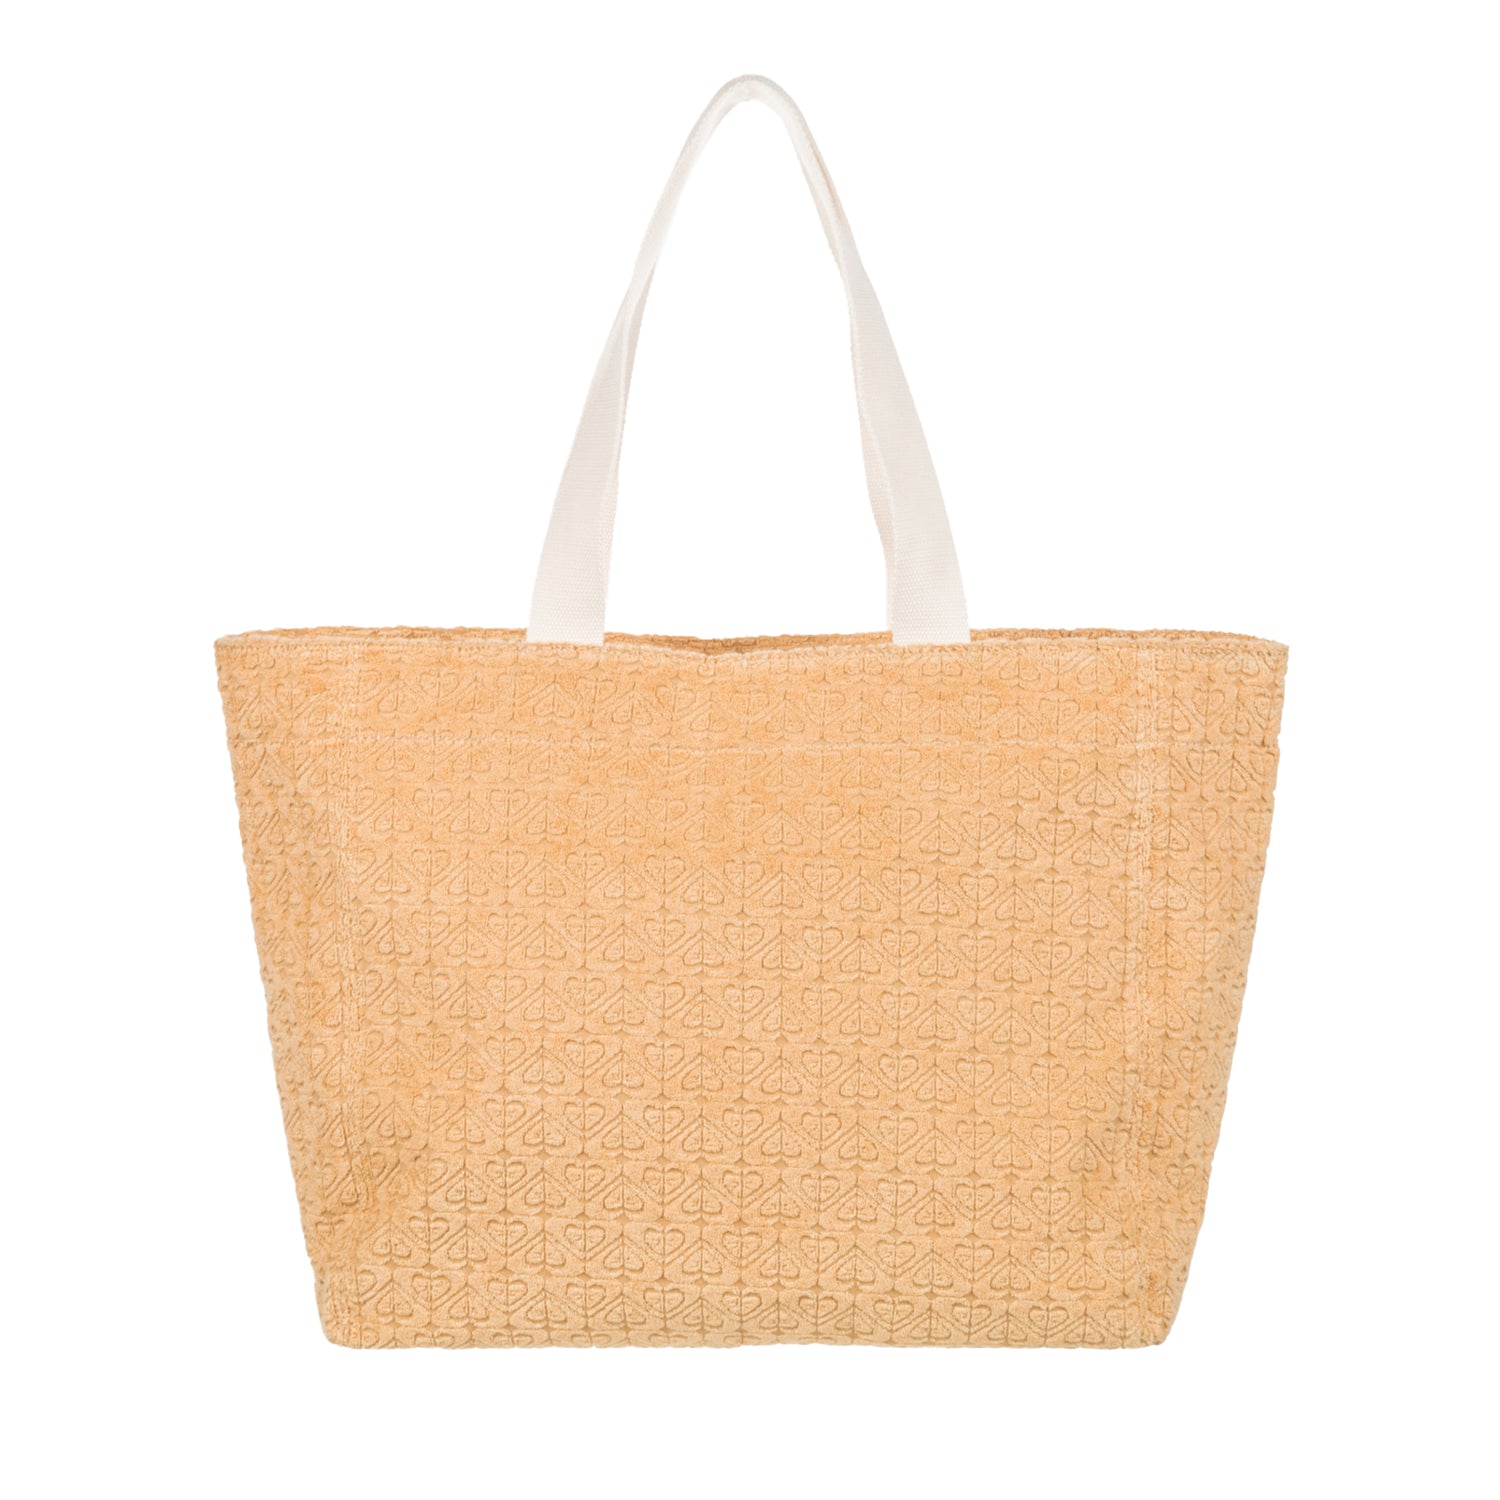 Roxy | Tote Bag Tequila Party